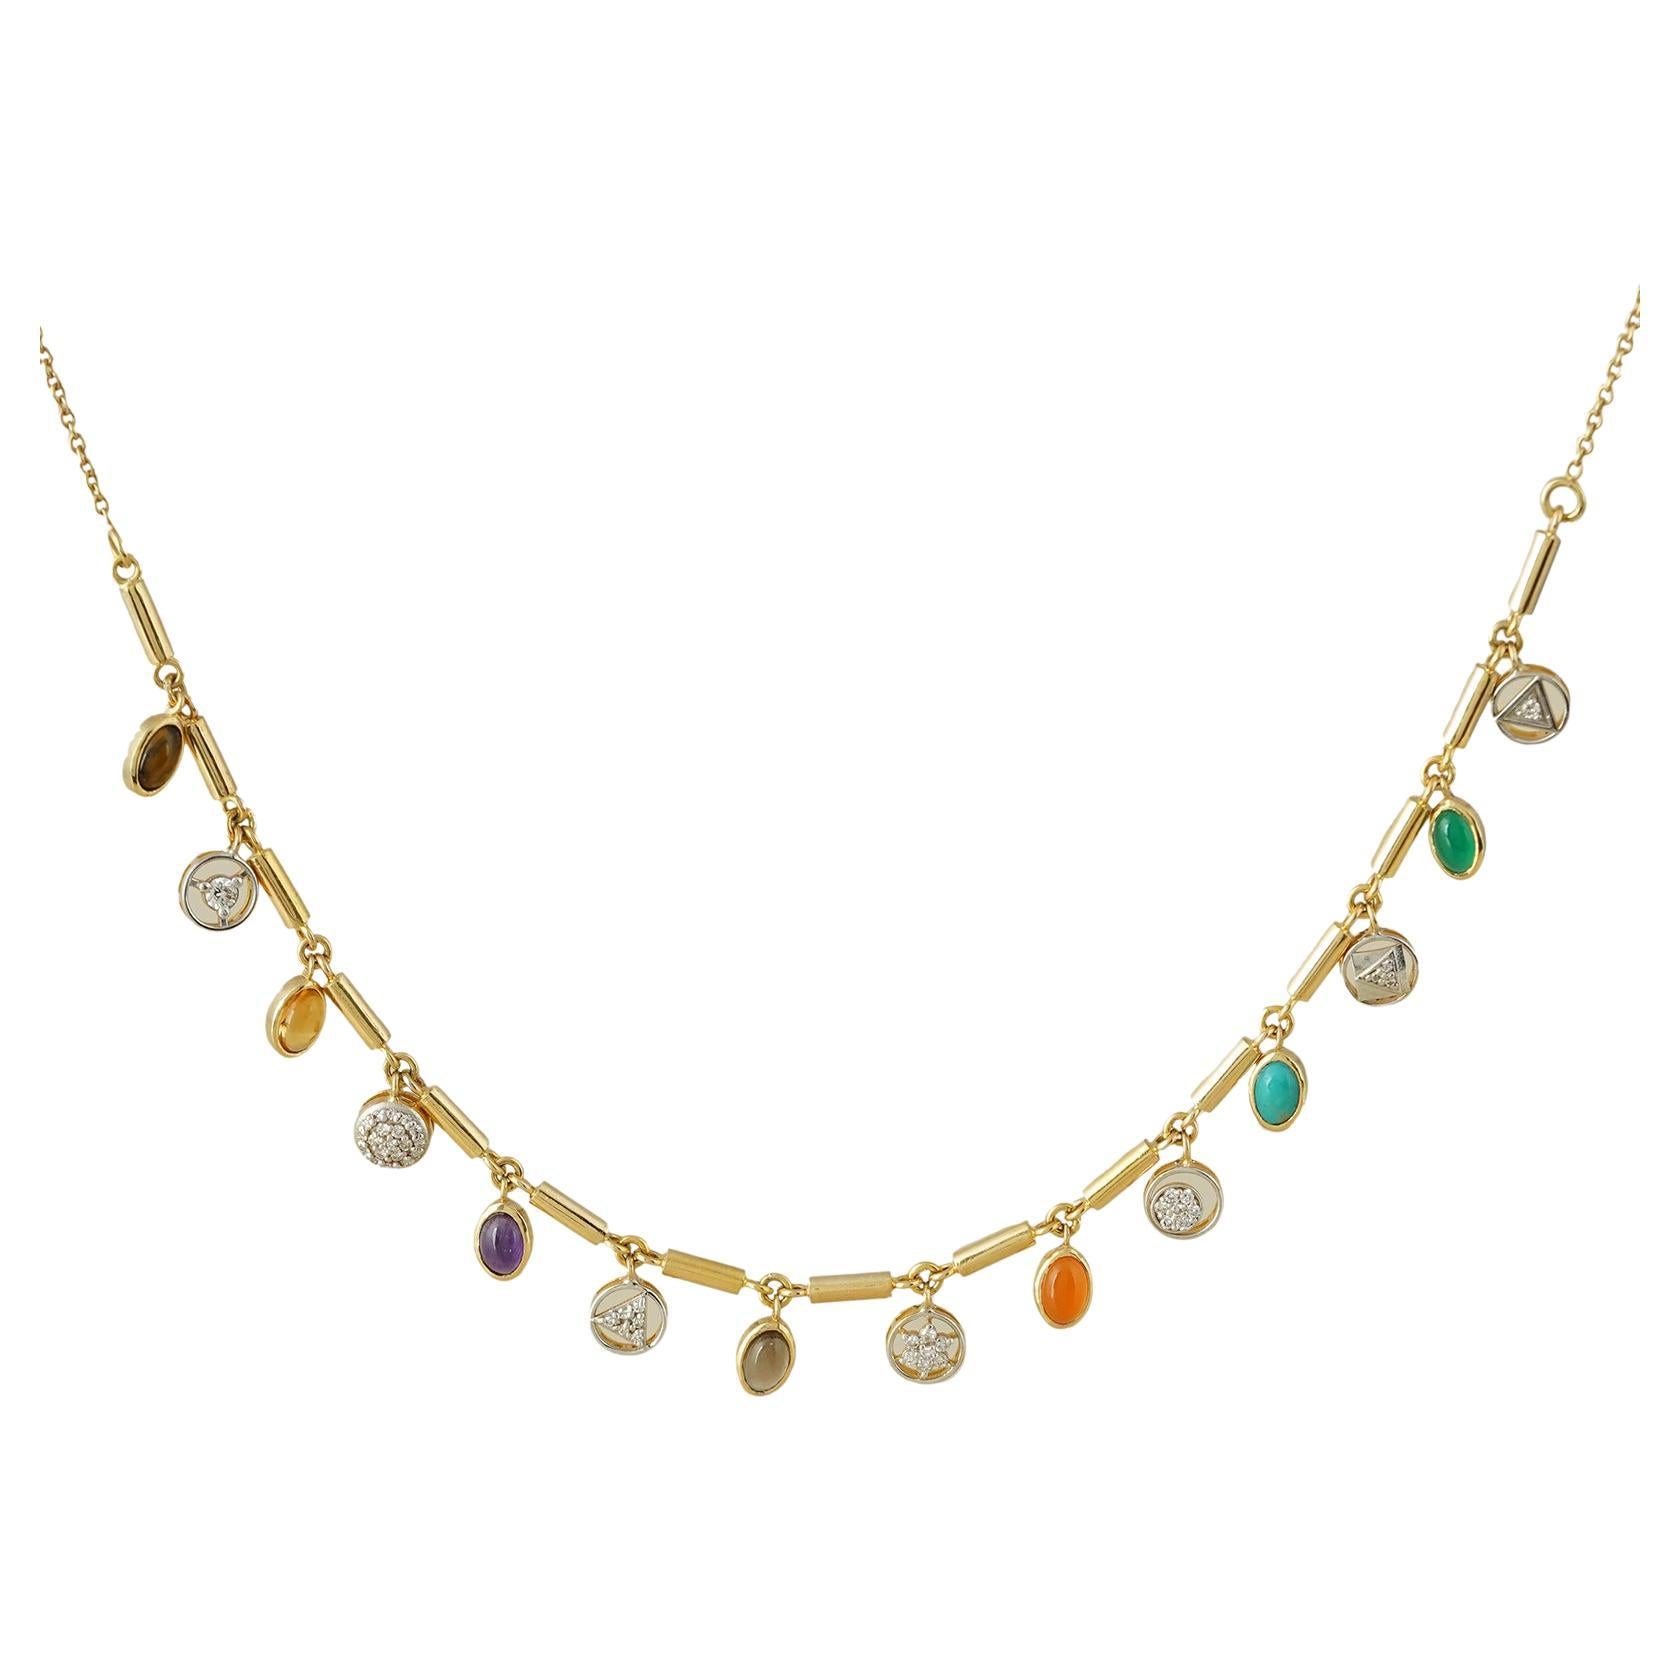 Moi Shakti Gold Diamond and Gemstone Necklace For Sale